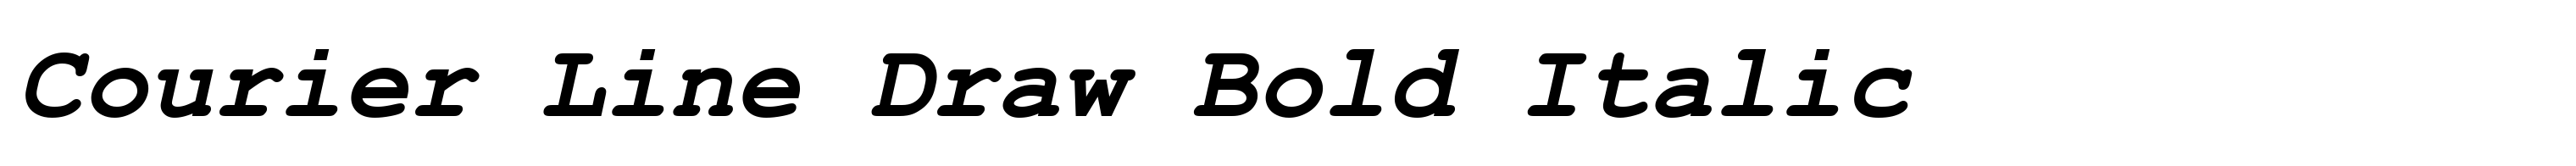 Courier Line Draw Bold Italic